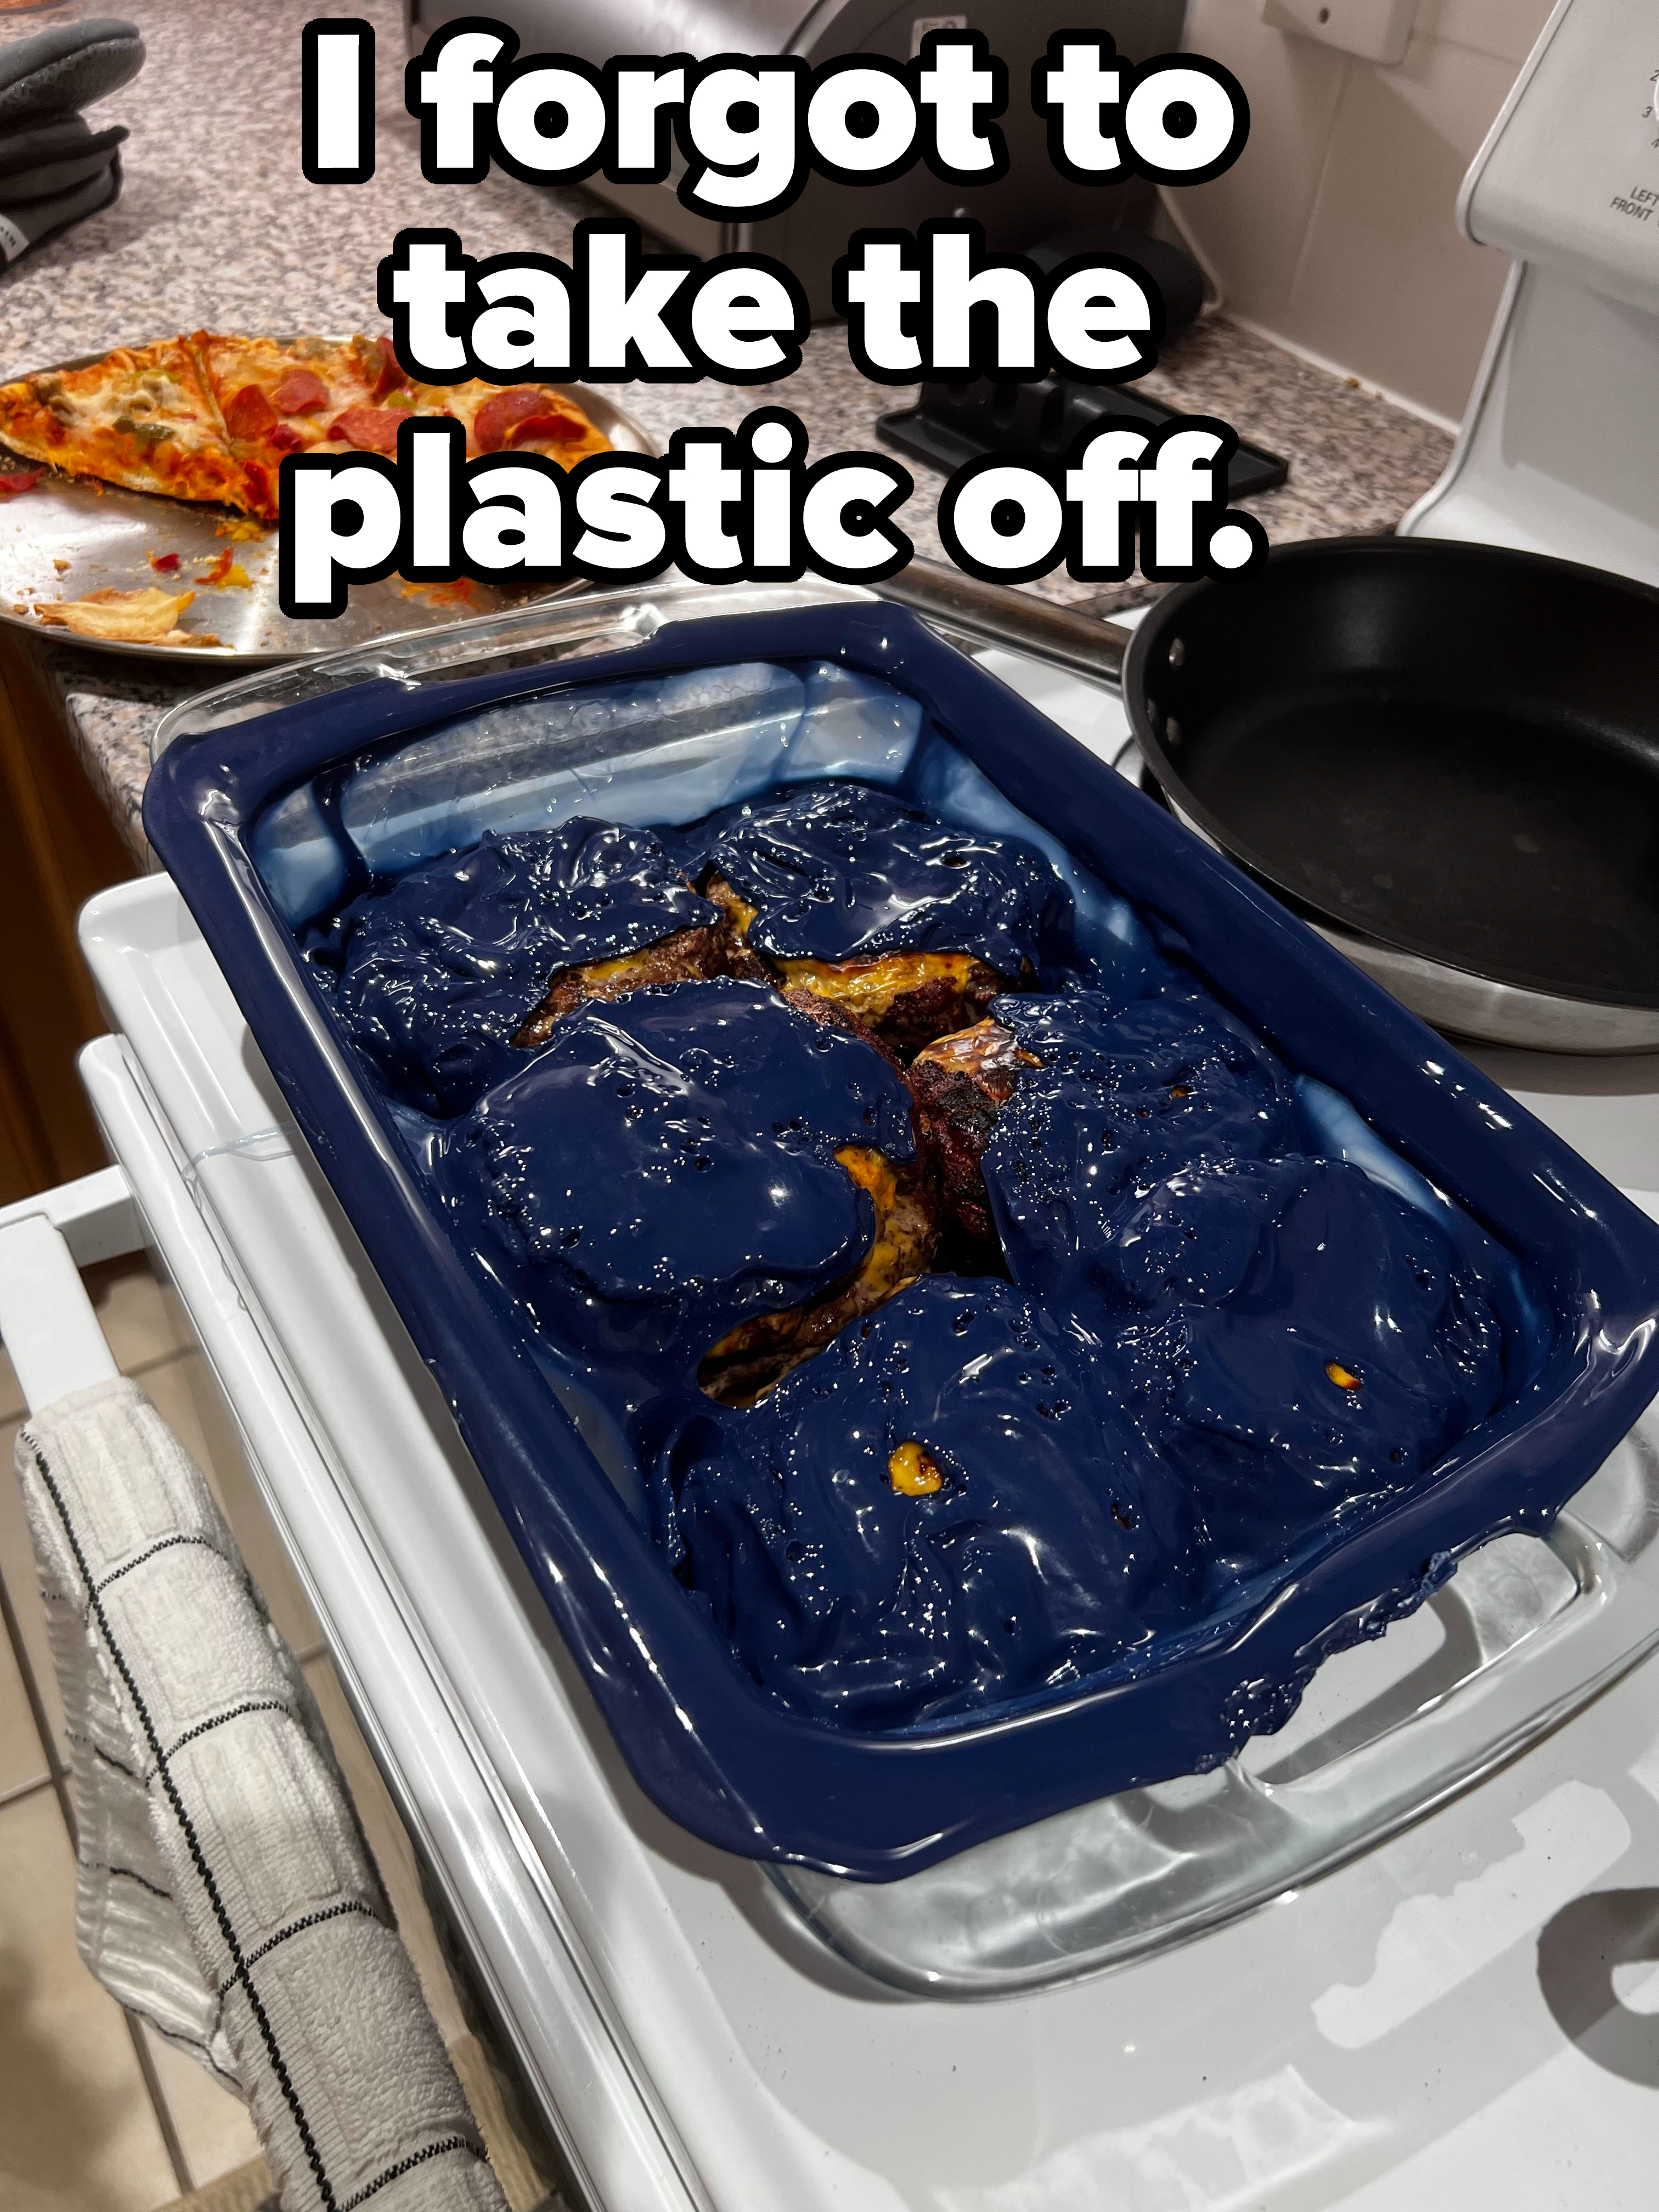 Melted plastic on a dish